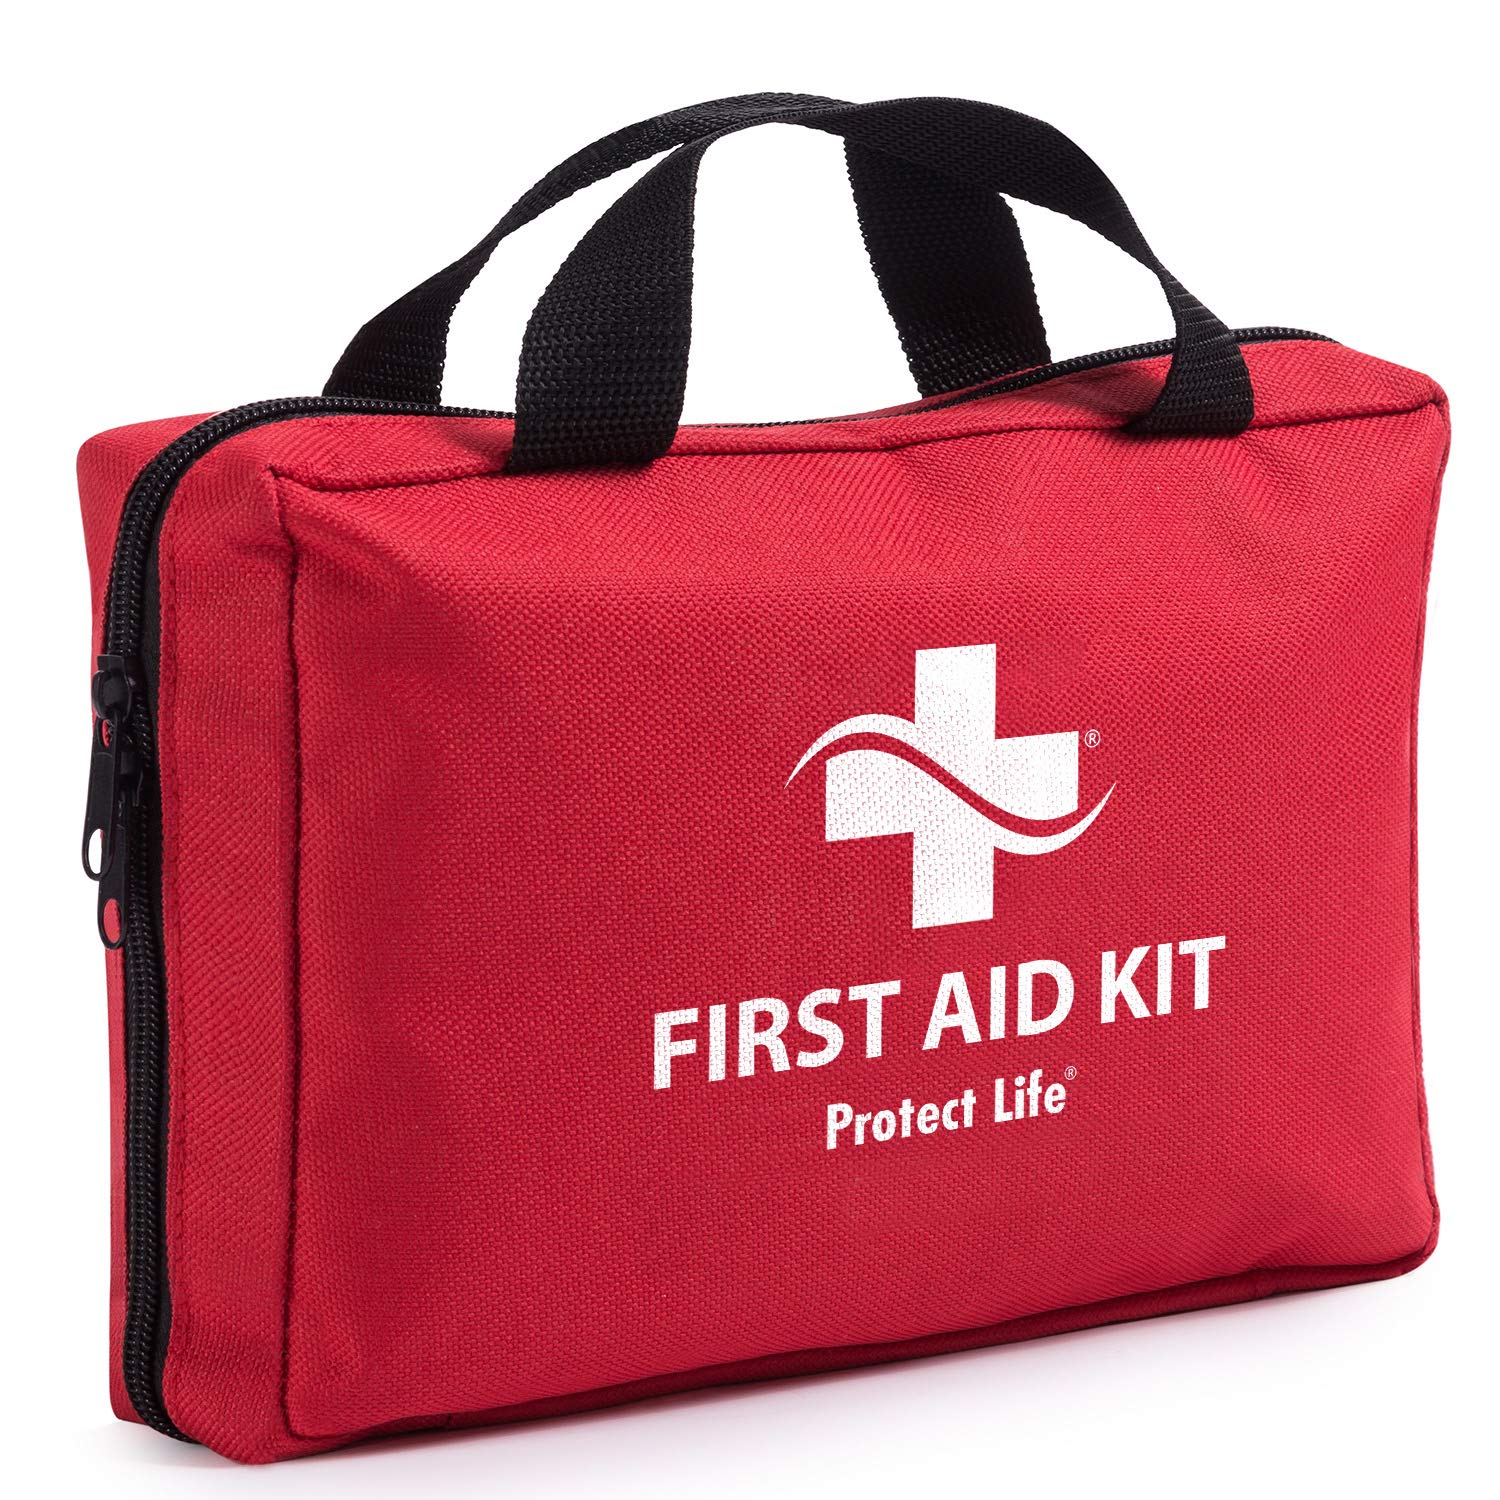 Medical/First Aid products